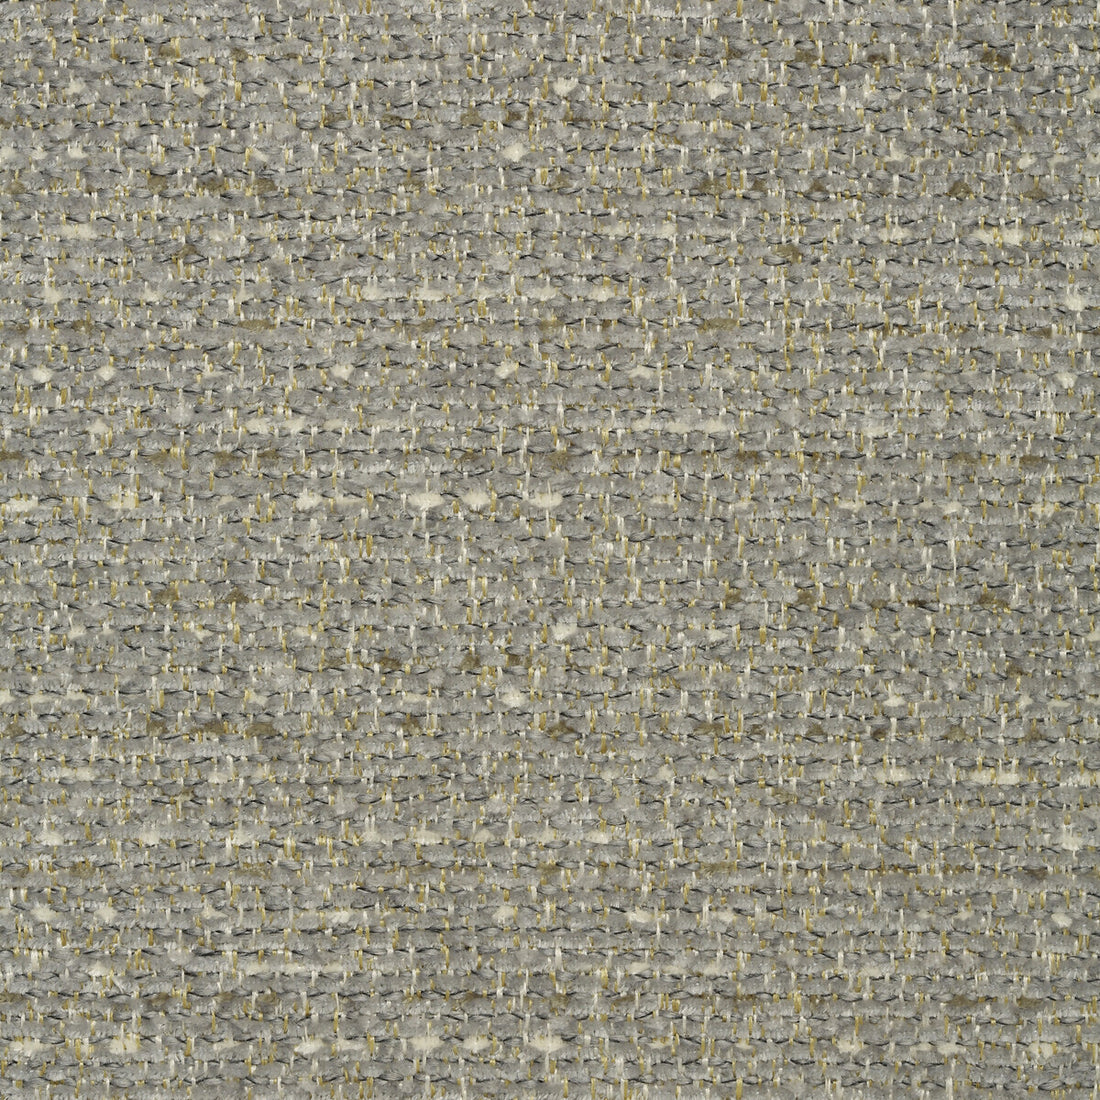 Kravet Smart fabric in 35117-11 color - pattern 35117.11.0 - by Kravet Smart in the Performance Crypton Home collection